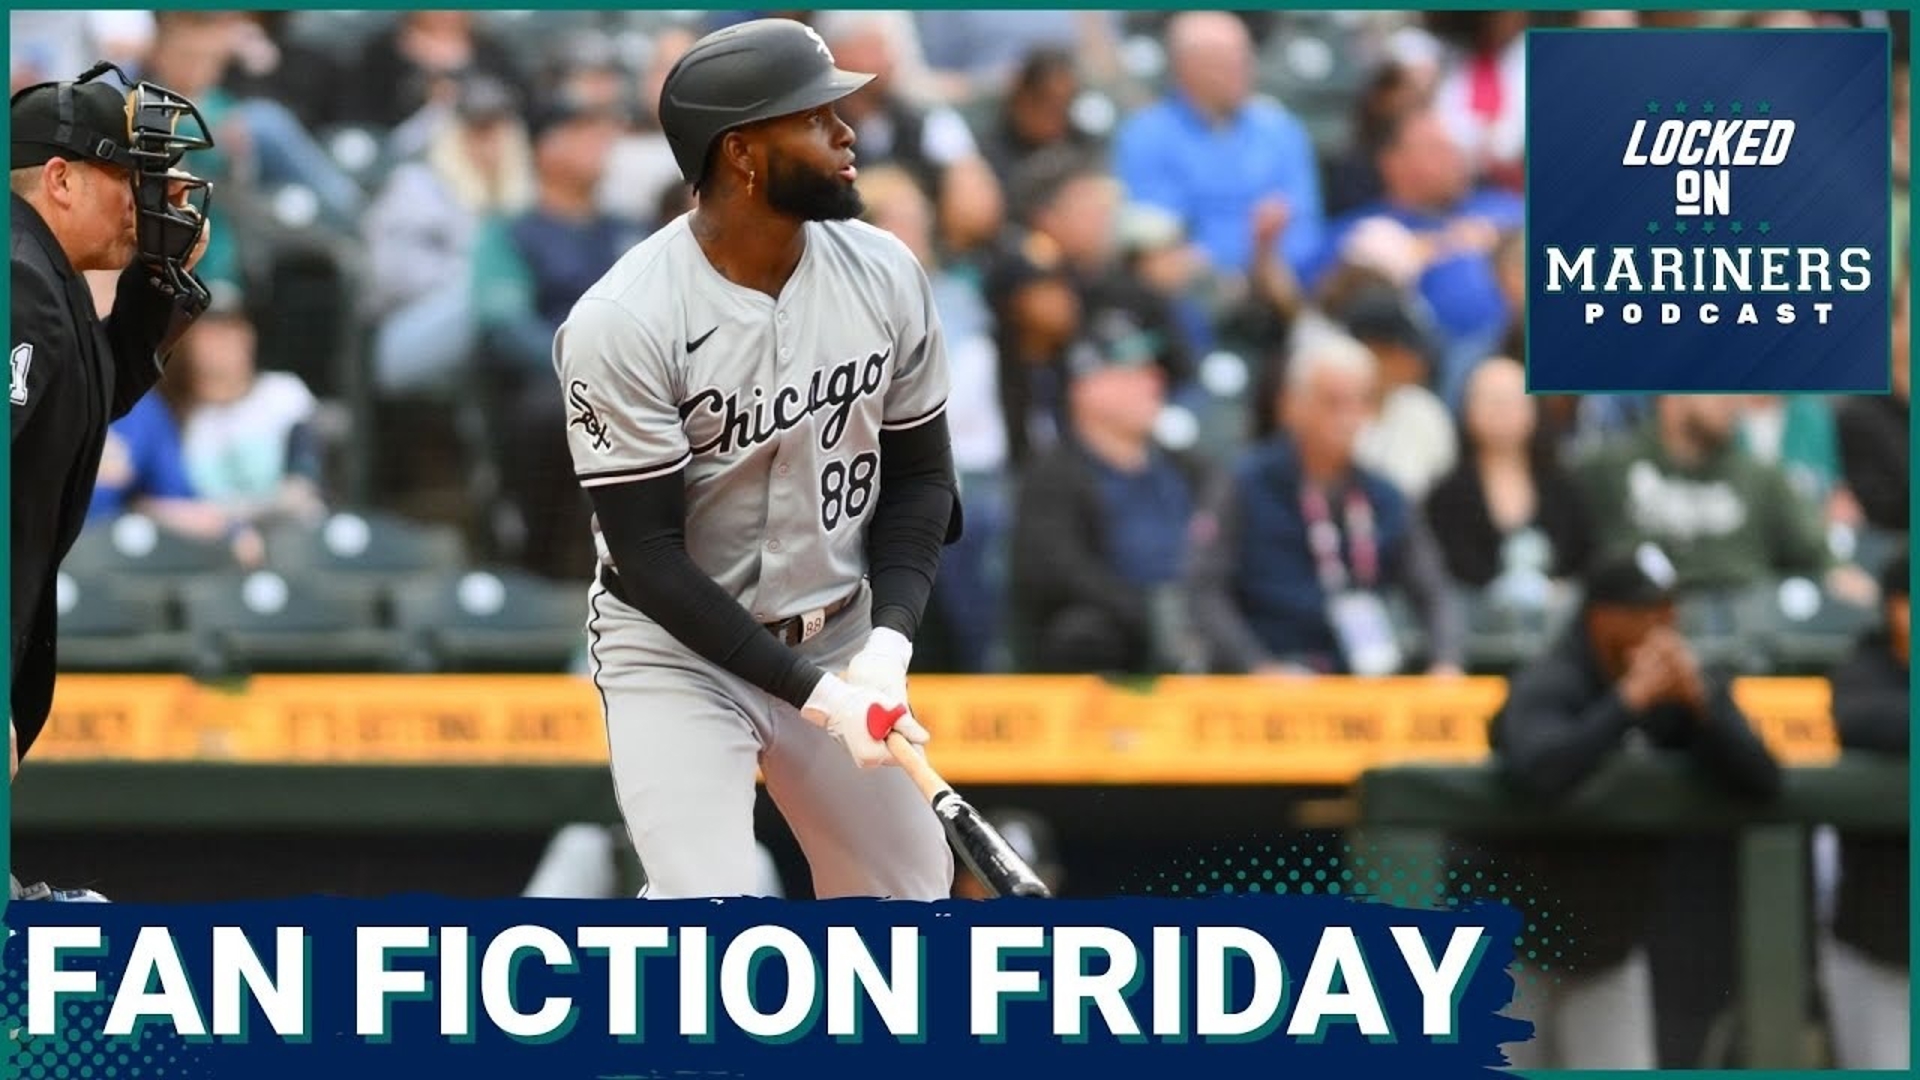 It's Fan Fiction Friday! Ty and Colby react to Mariners trade ideas from listeners, including deals for Luis Robert Jr., Ryan Helsley, Luis Severino, and more.